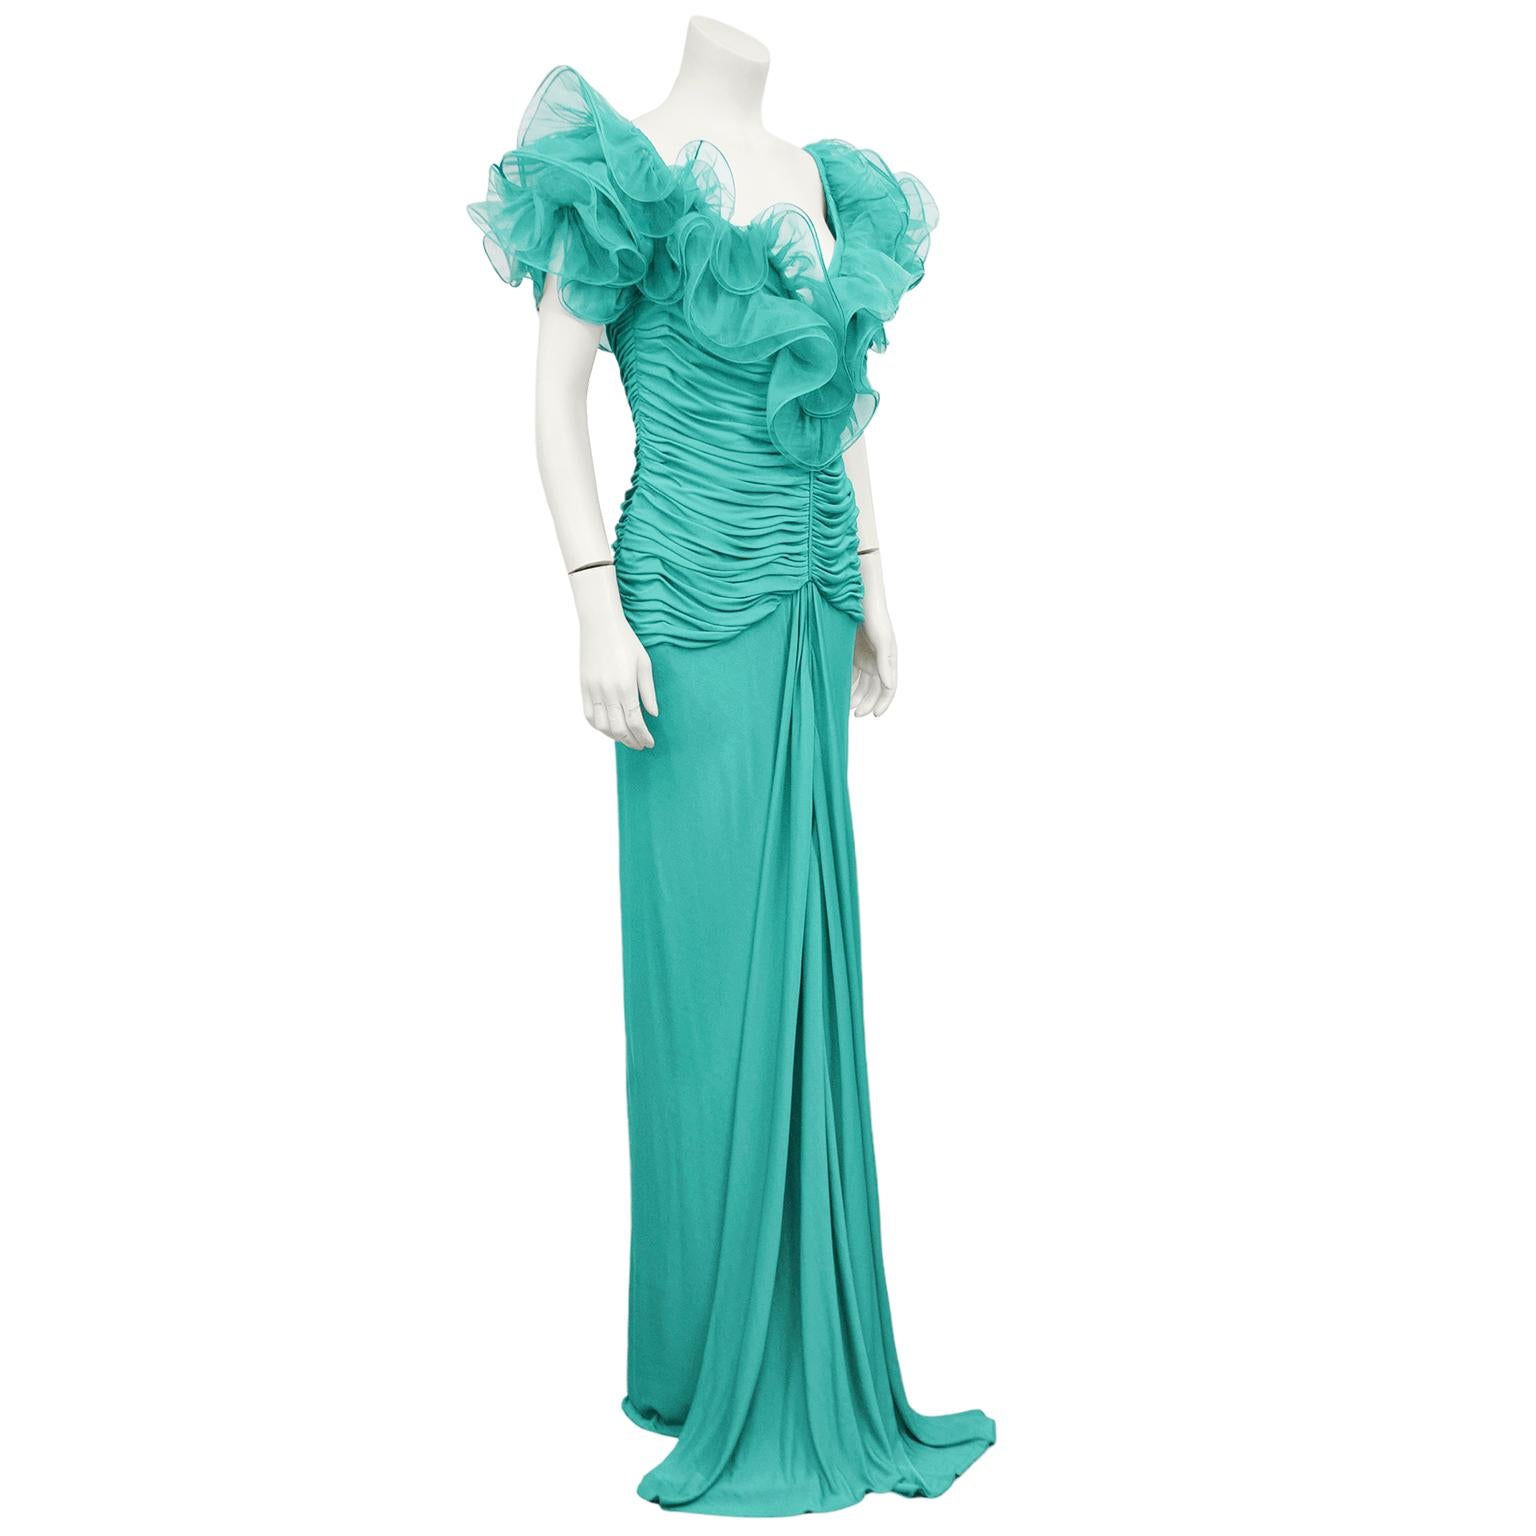 1980s Candice Fraiberger turquoise jersey gown. Stunning v neckline with layered ruffle shoulders and ruching throughout bodice. Drop waist with floor length skirt featuring draping down centre that falls beautifully and pools on the ground. Marked